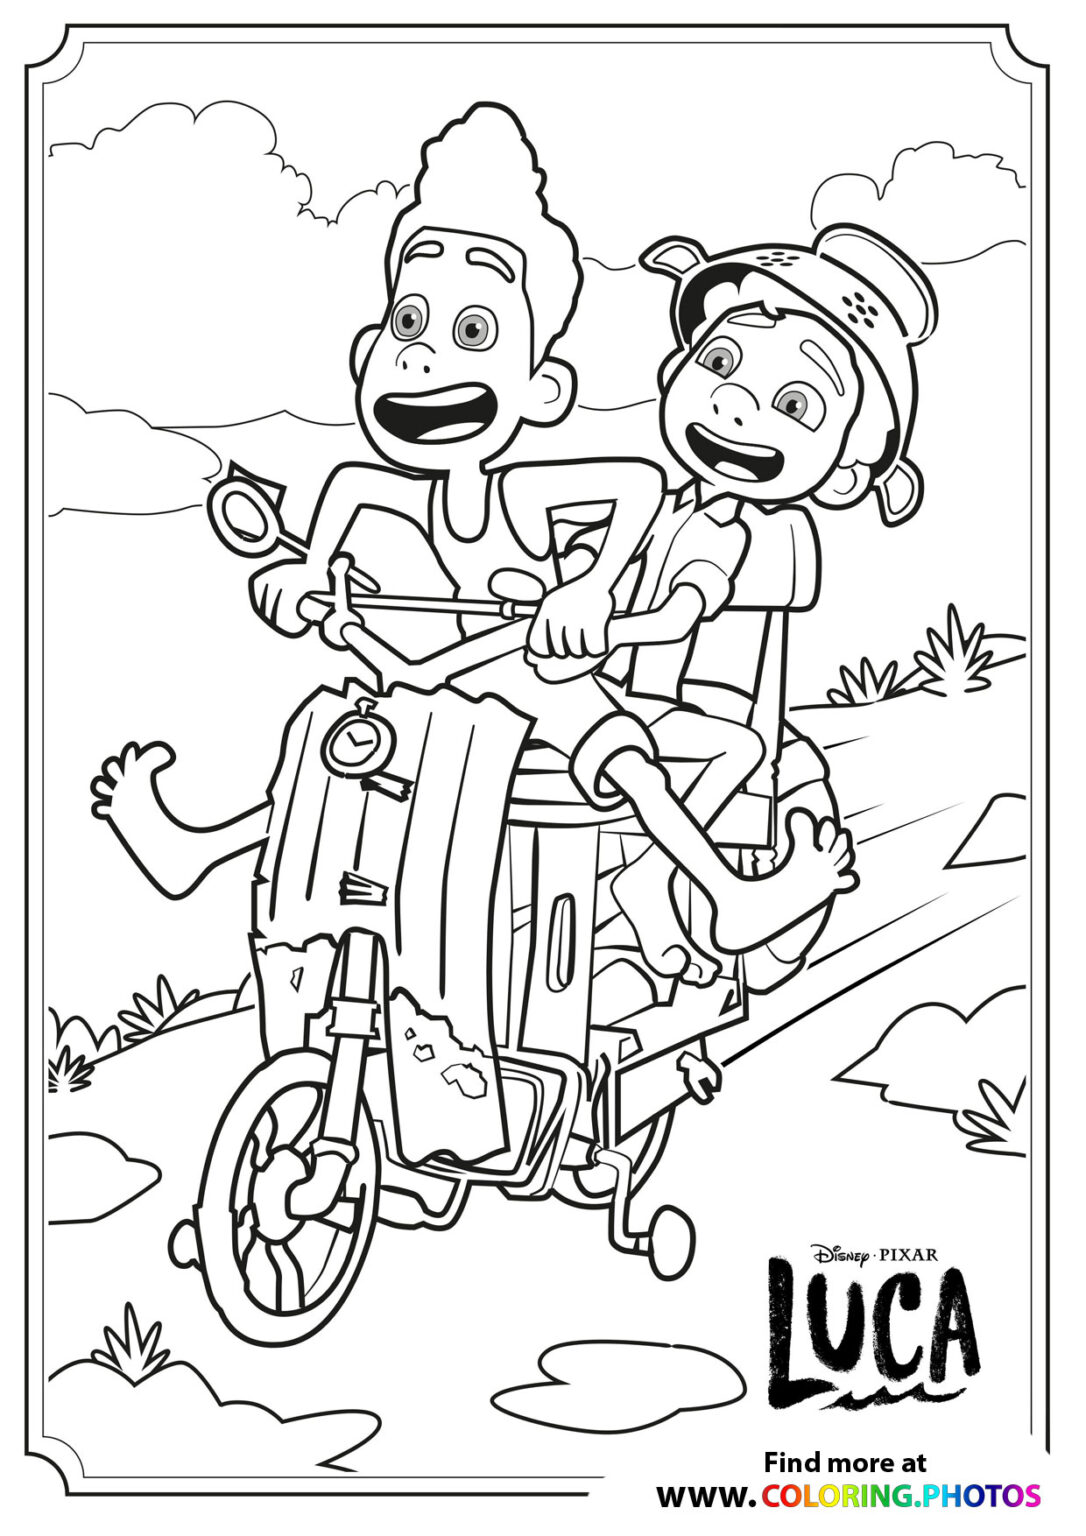 Encanto Printable Coloring Pages - Customize and Print